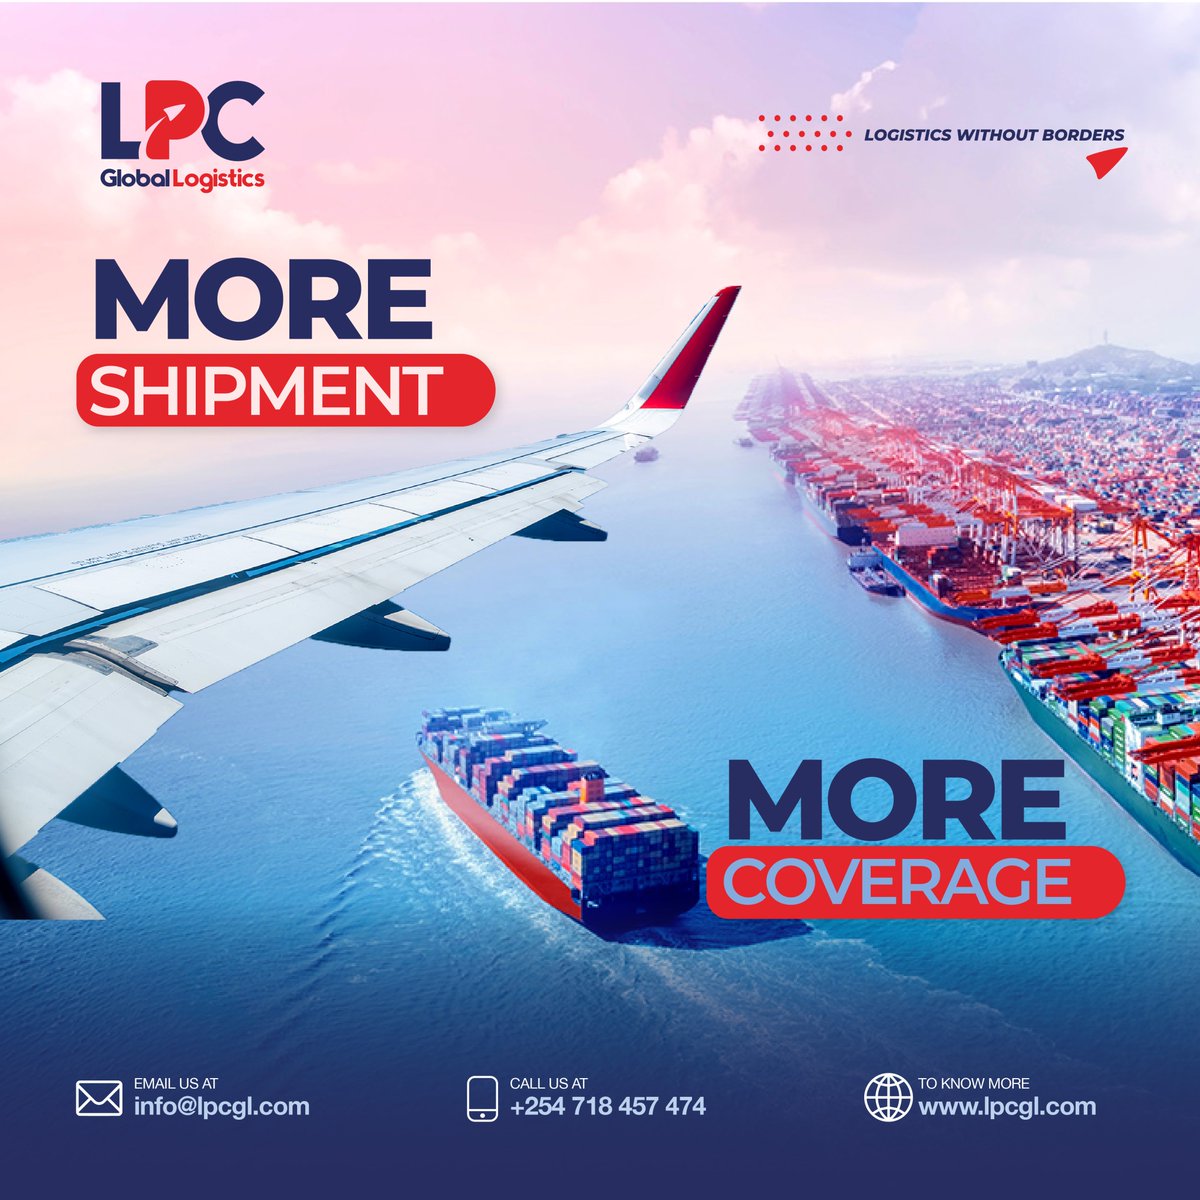 From the skies to the seas, we have got your logistics covered. Our comprehensive shipping solutions ensure your consignments reach their destination safely and on time. #GlobalShipping #AirFreight #SeaFreight #LogisticsExperts #LPCCFS